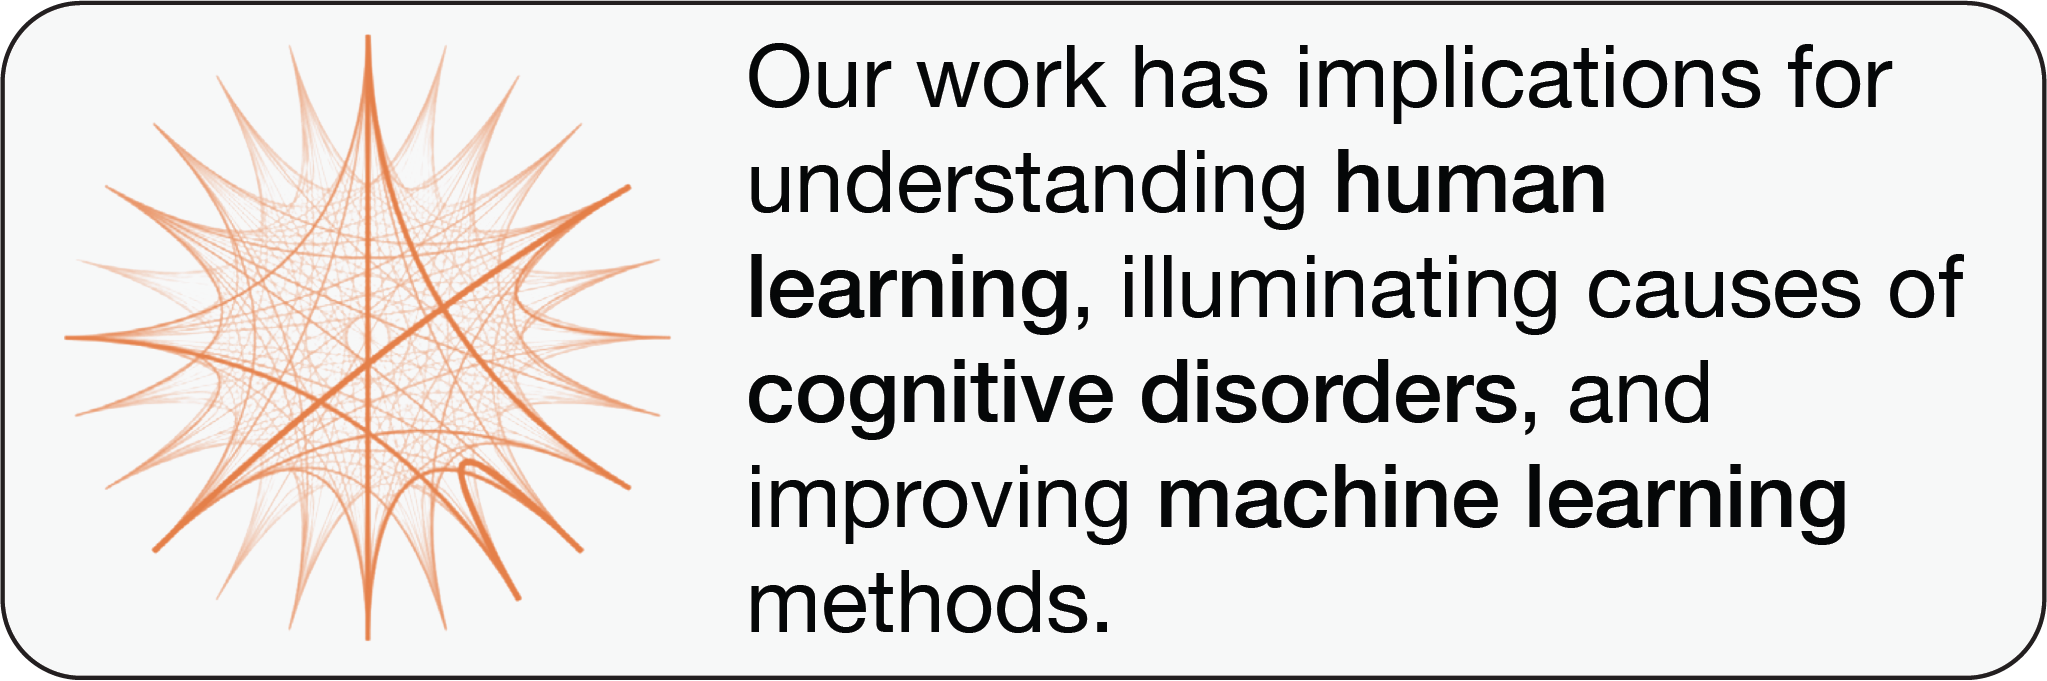 Our work has implications for understanding human learning, illuminating causes of cognitive disorders, and improving machine learning methods.